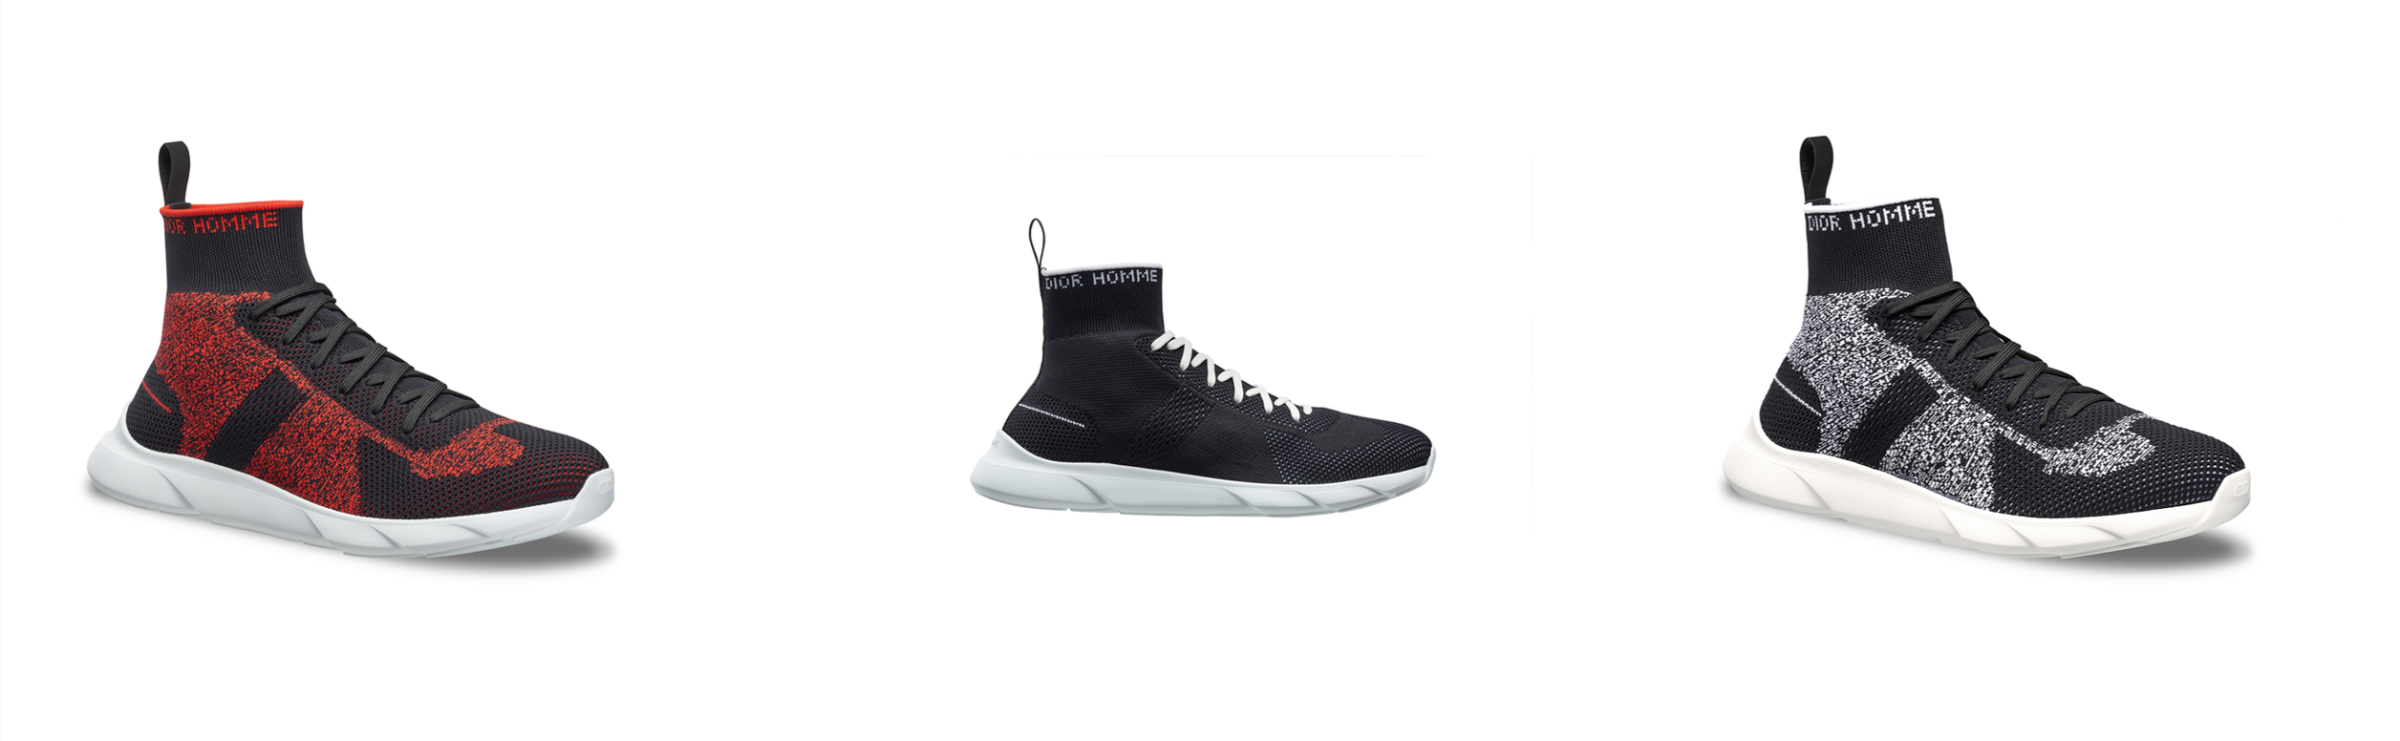 Dior Homme B21 Sneakers